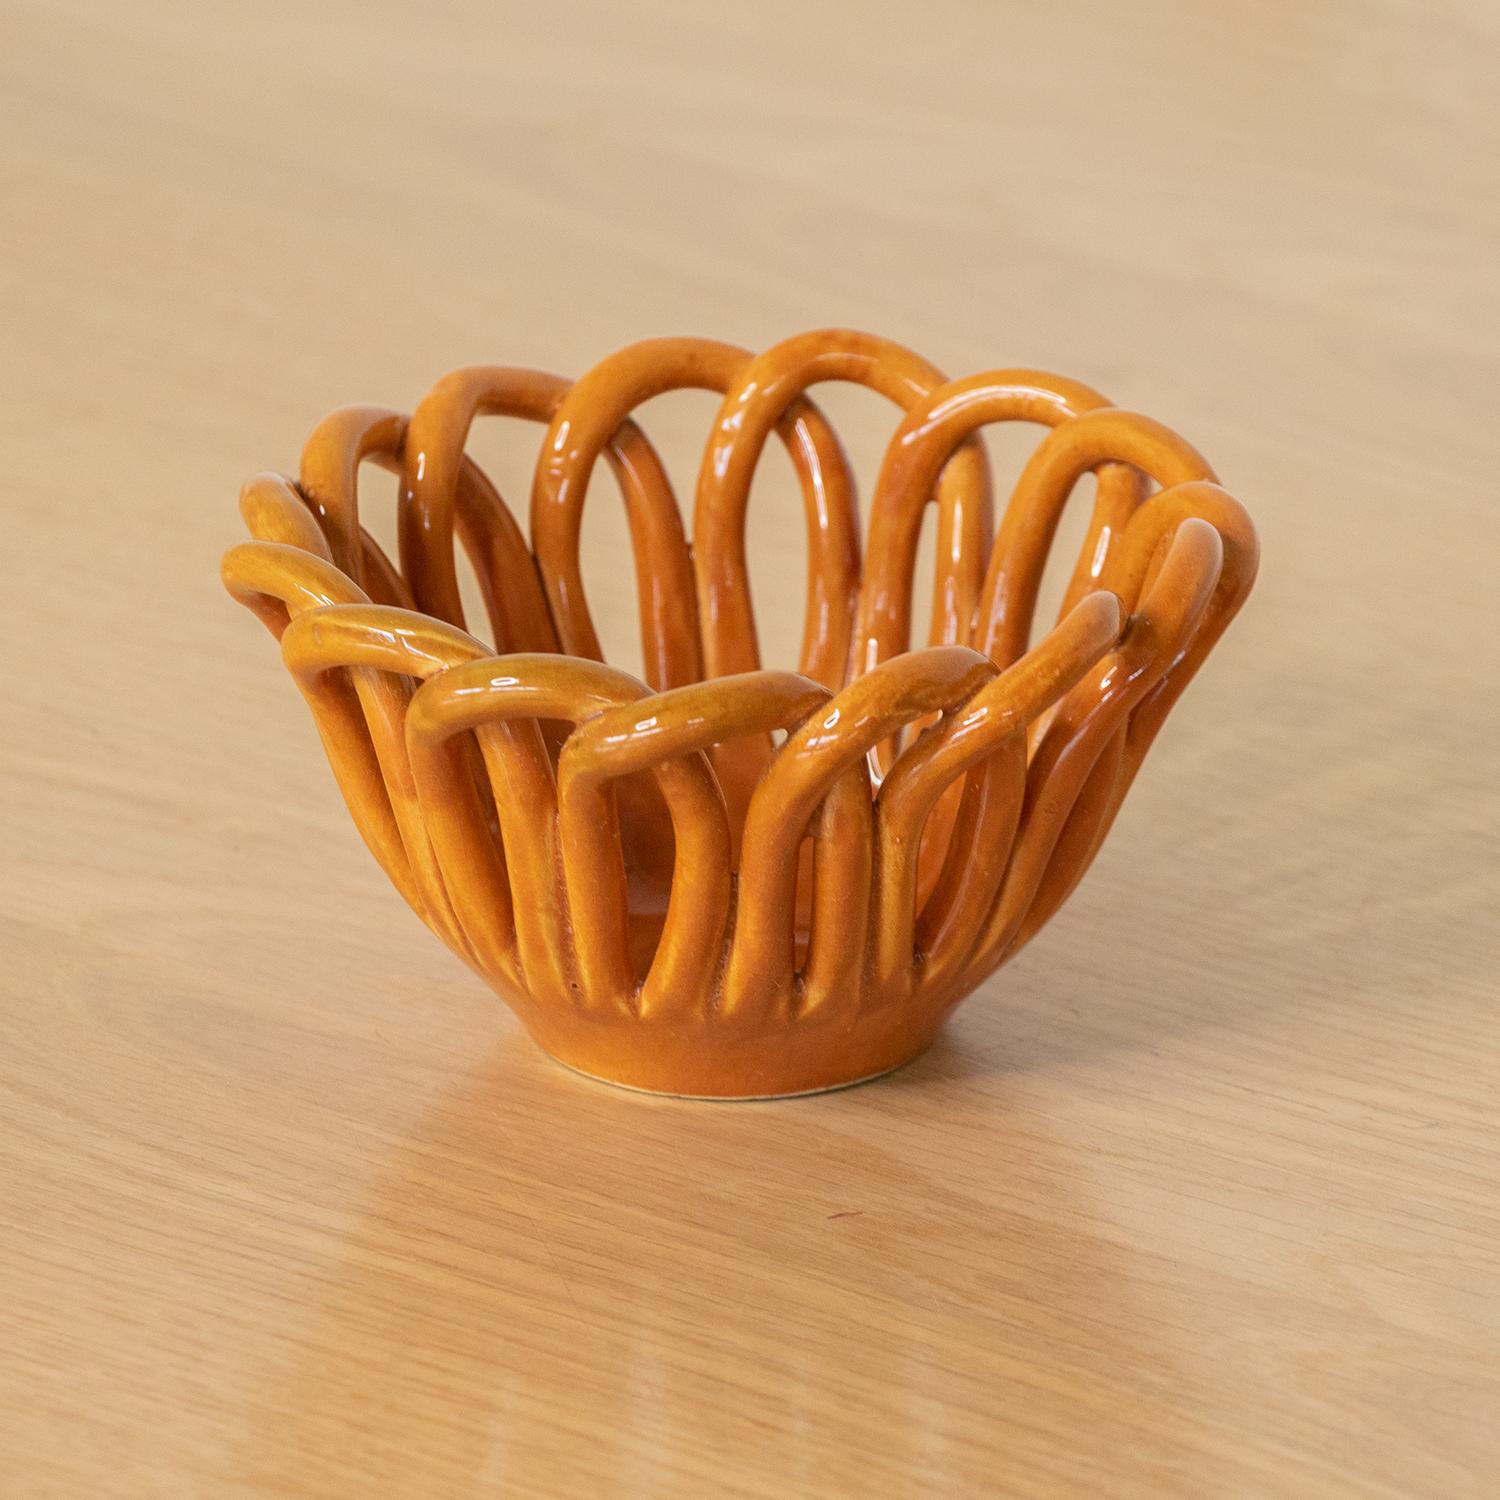 Vintage ceramic bowl with woven loop detail from Vallauris, France. Beautiful rich burnt orange glaze. Perfect as a decorative object or catch-all.